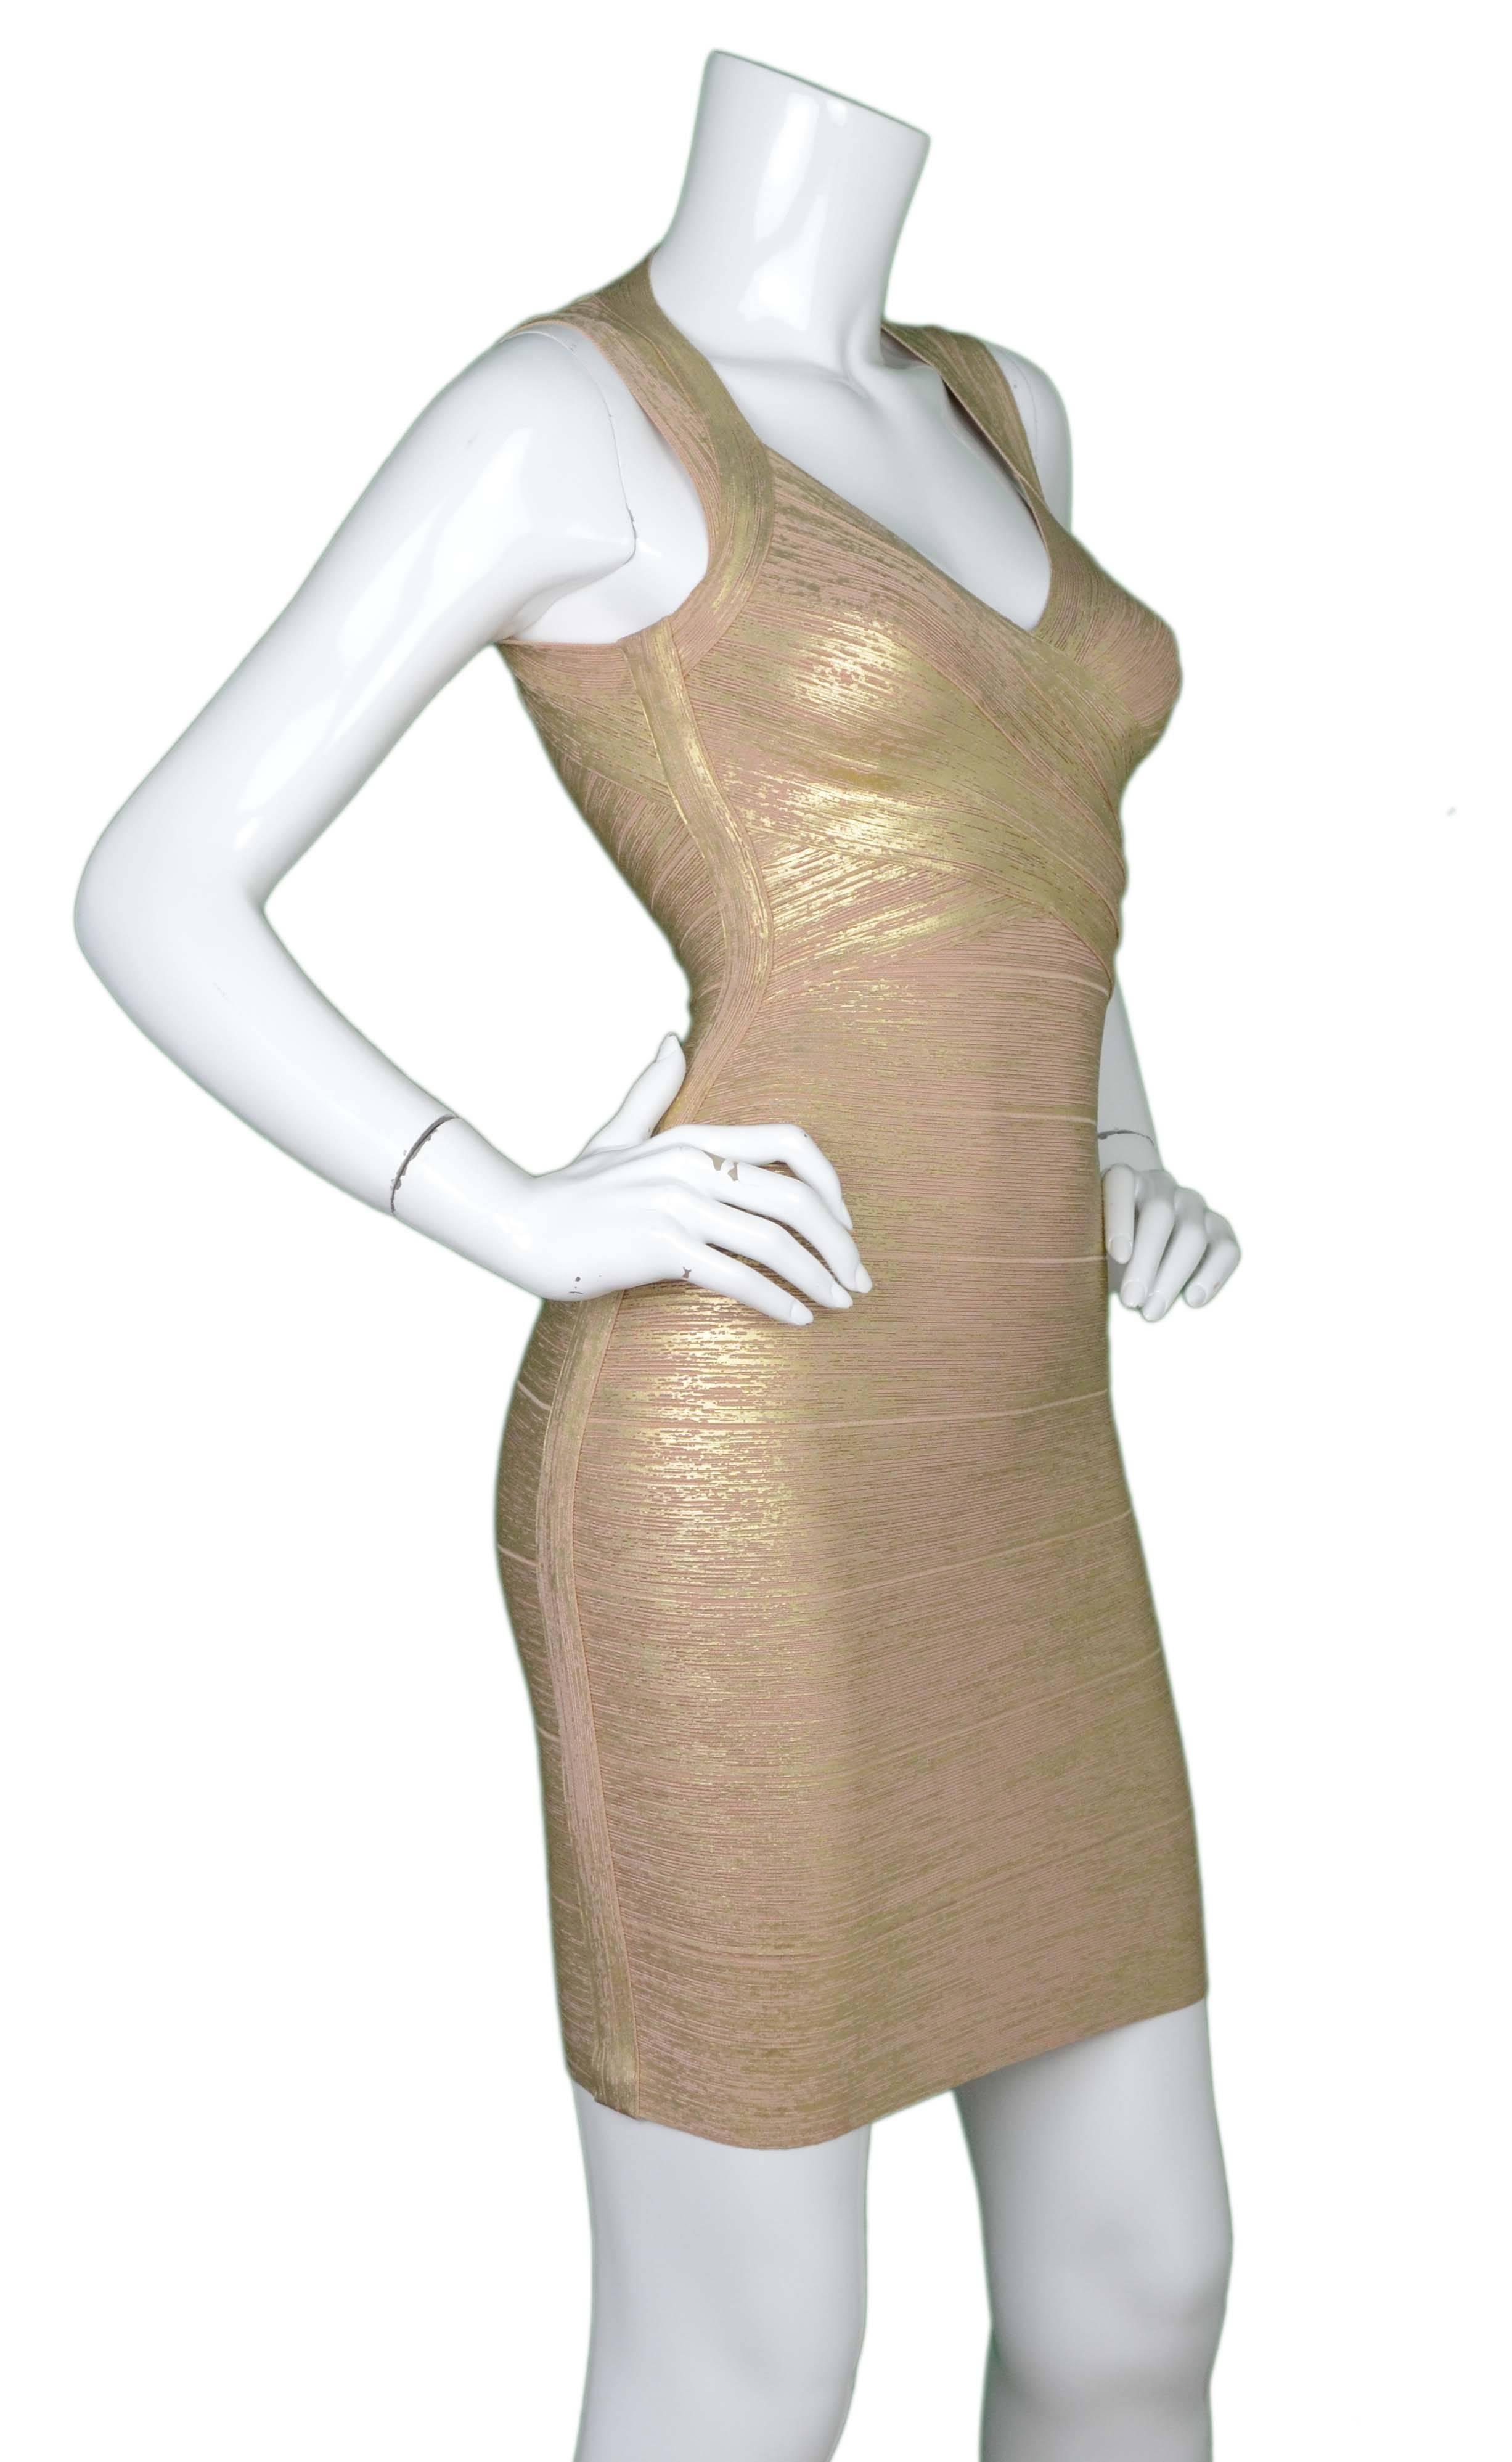 Herve Leger Champagne & Gold Painted Bandage Dress
 Features gold metallic paint over champagne color
Made In: China
Color: Champagne and gold 
Composition: 90% rayon, 1% spandex
Lining: None
Closure/Opening: Back center zipper and hook and